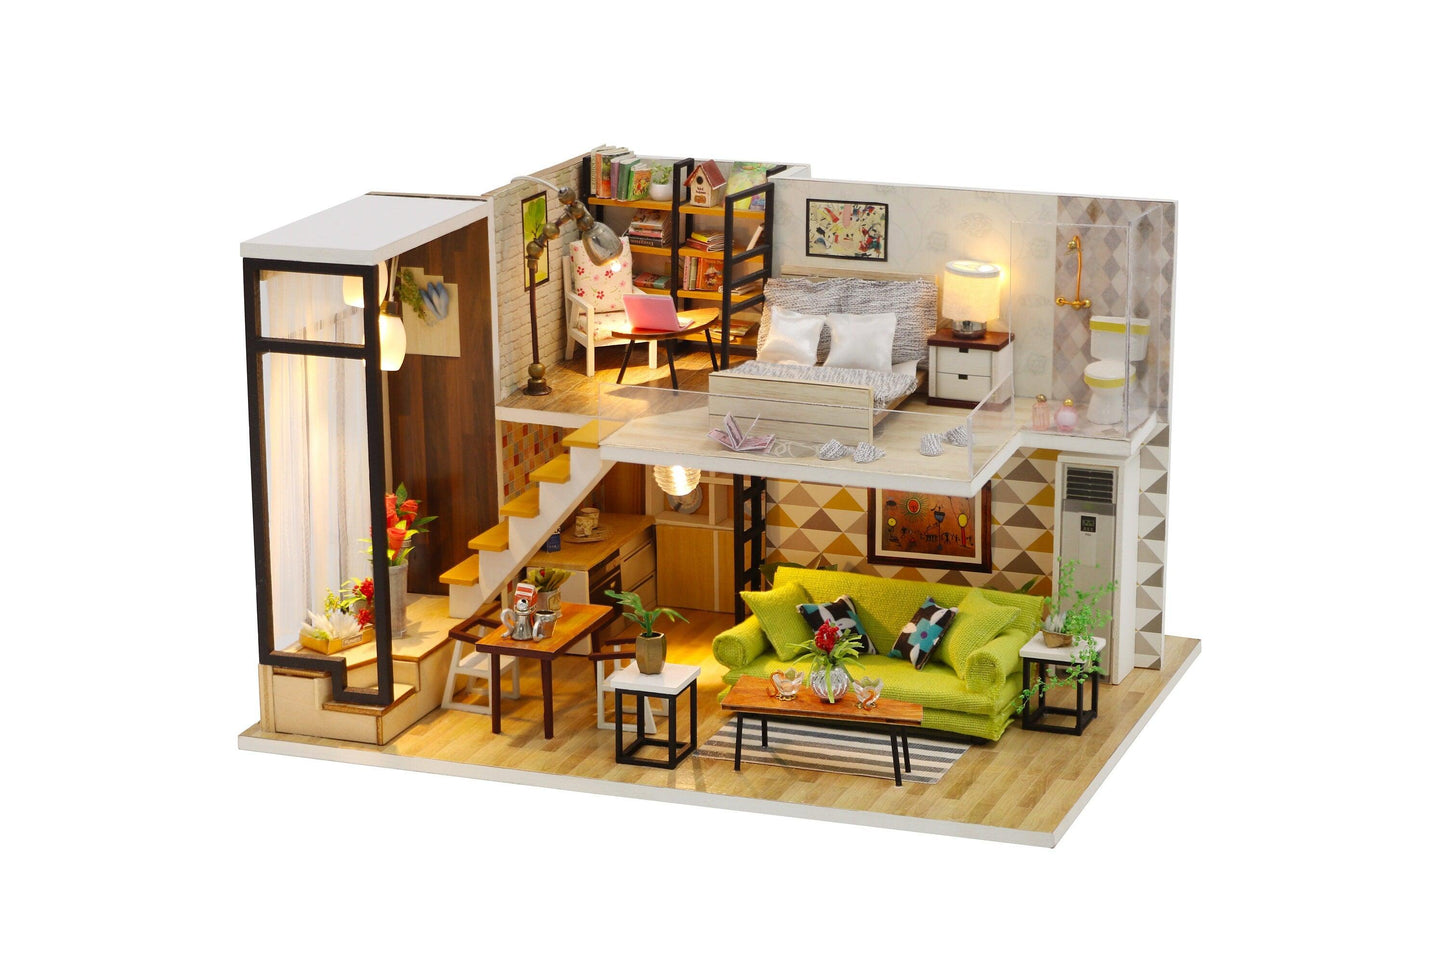 Doll House Miniature Dollhouse With Furniture Kit Wooden House Miniatures Toys For Children New Year Christmas Gift DIY Dollhouse Kit Adult